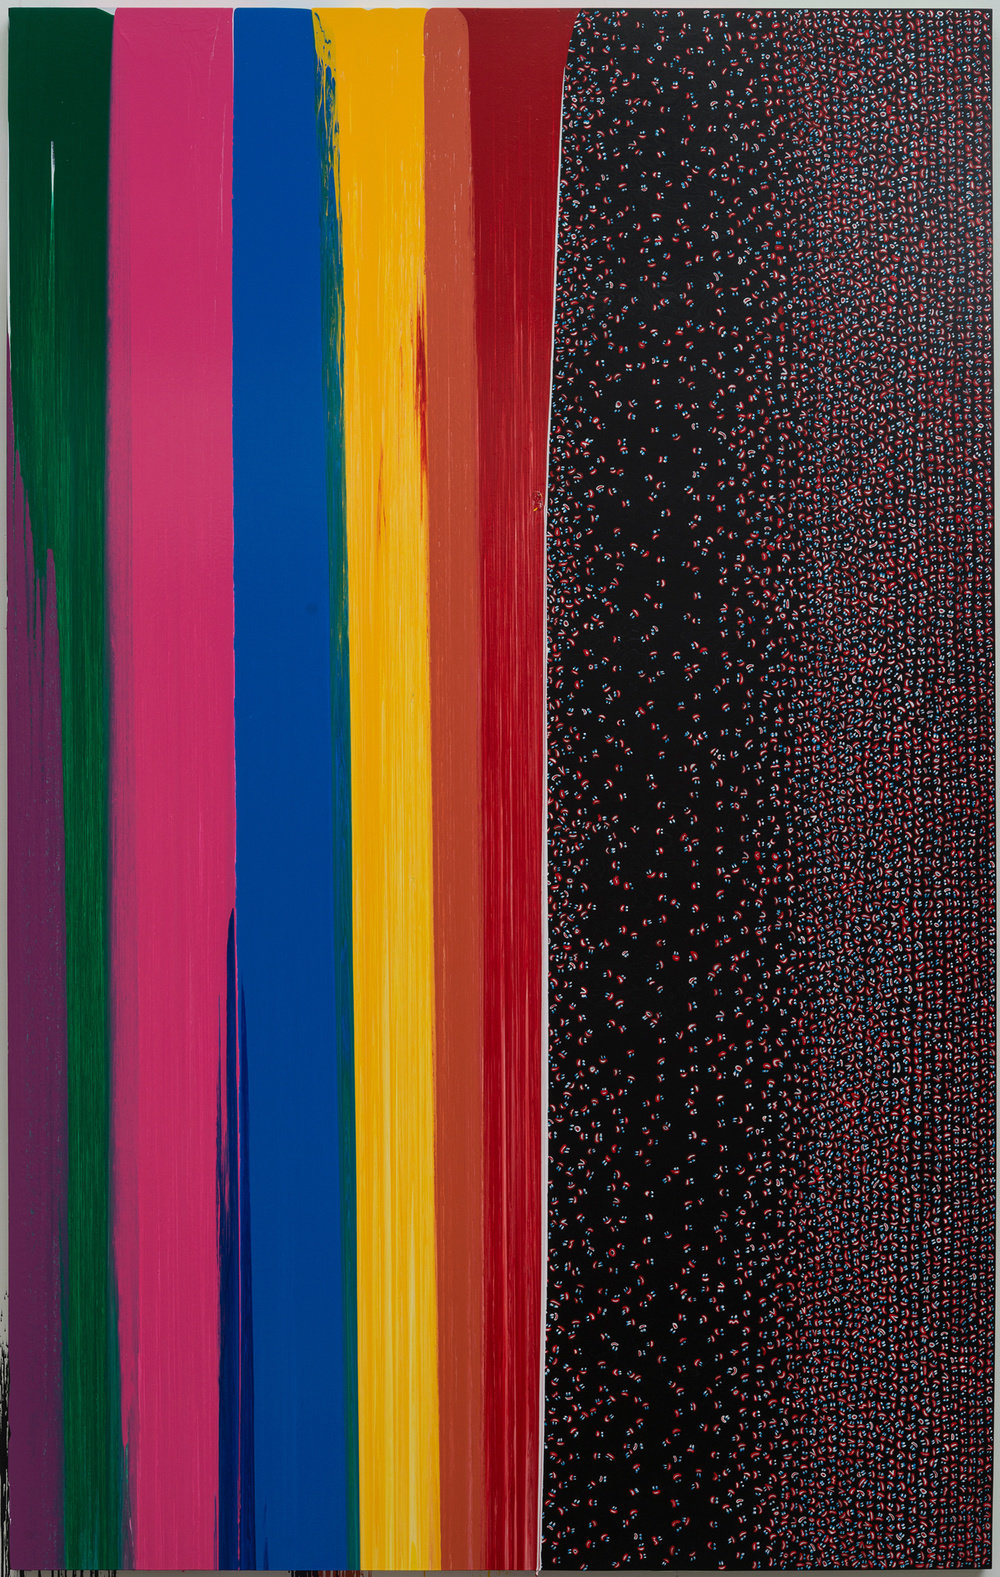 Strother, when the lights go out in the africa (light a match and smile nigga, there's paint everywhere), 2014, automotive paint and acrylic on birch panel, 108 x 60 x 2 in. 274.32 x 152.4 x 5.08 cm